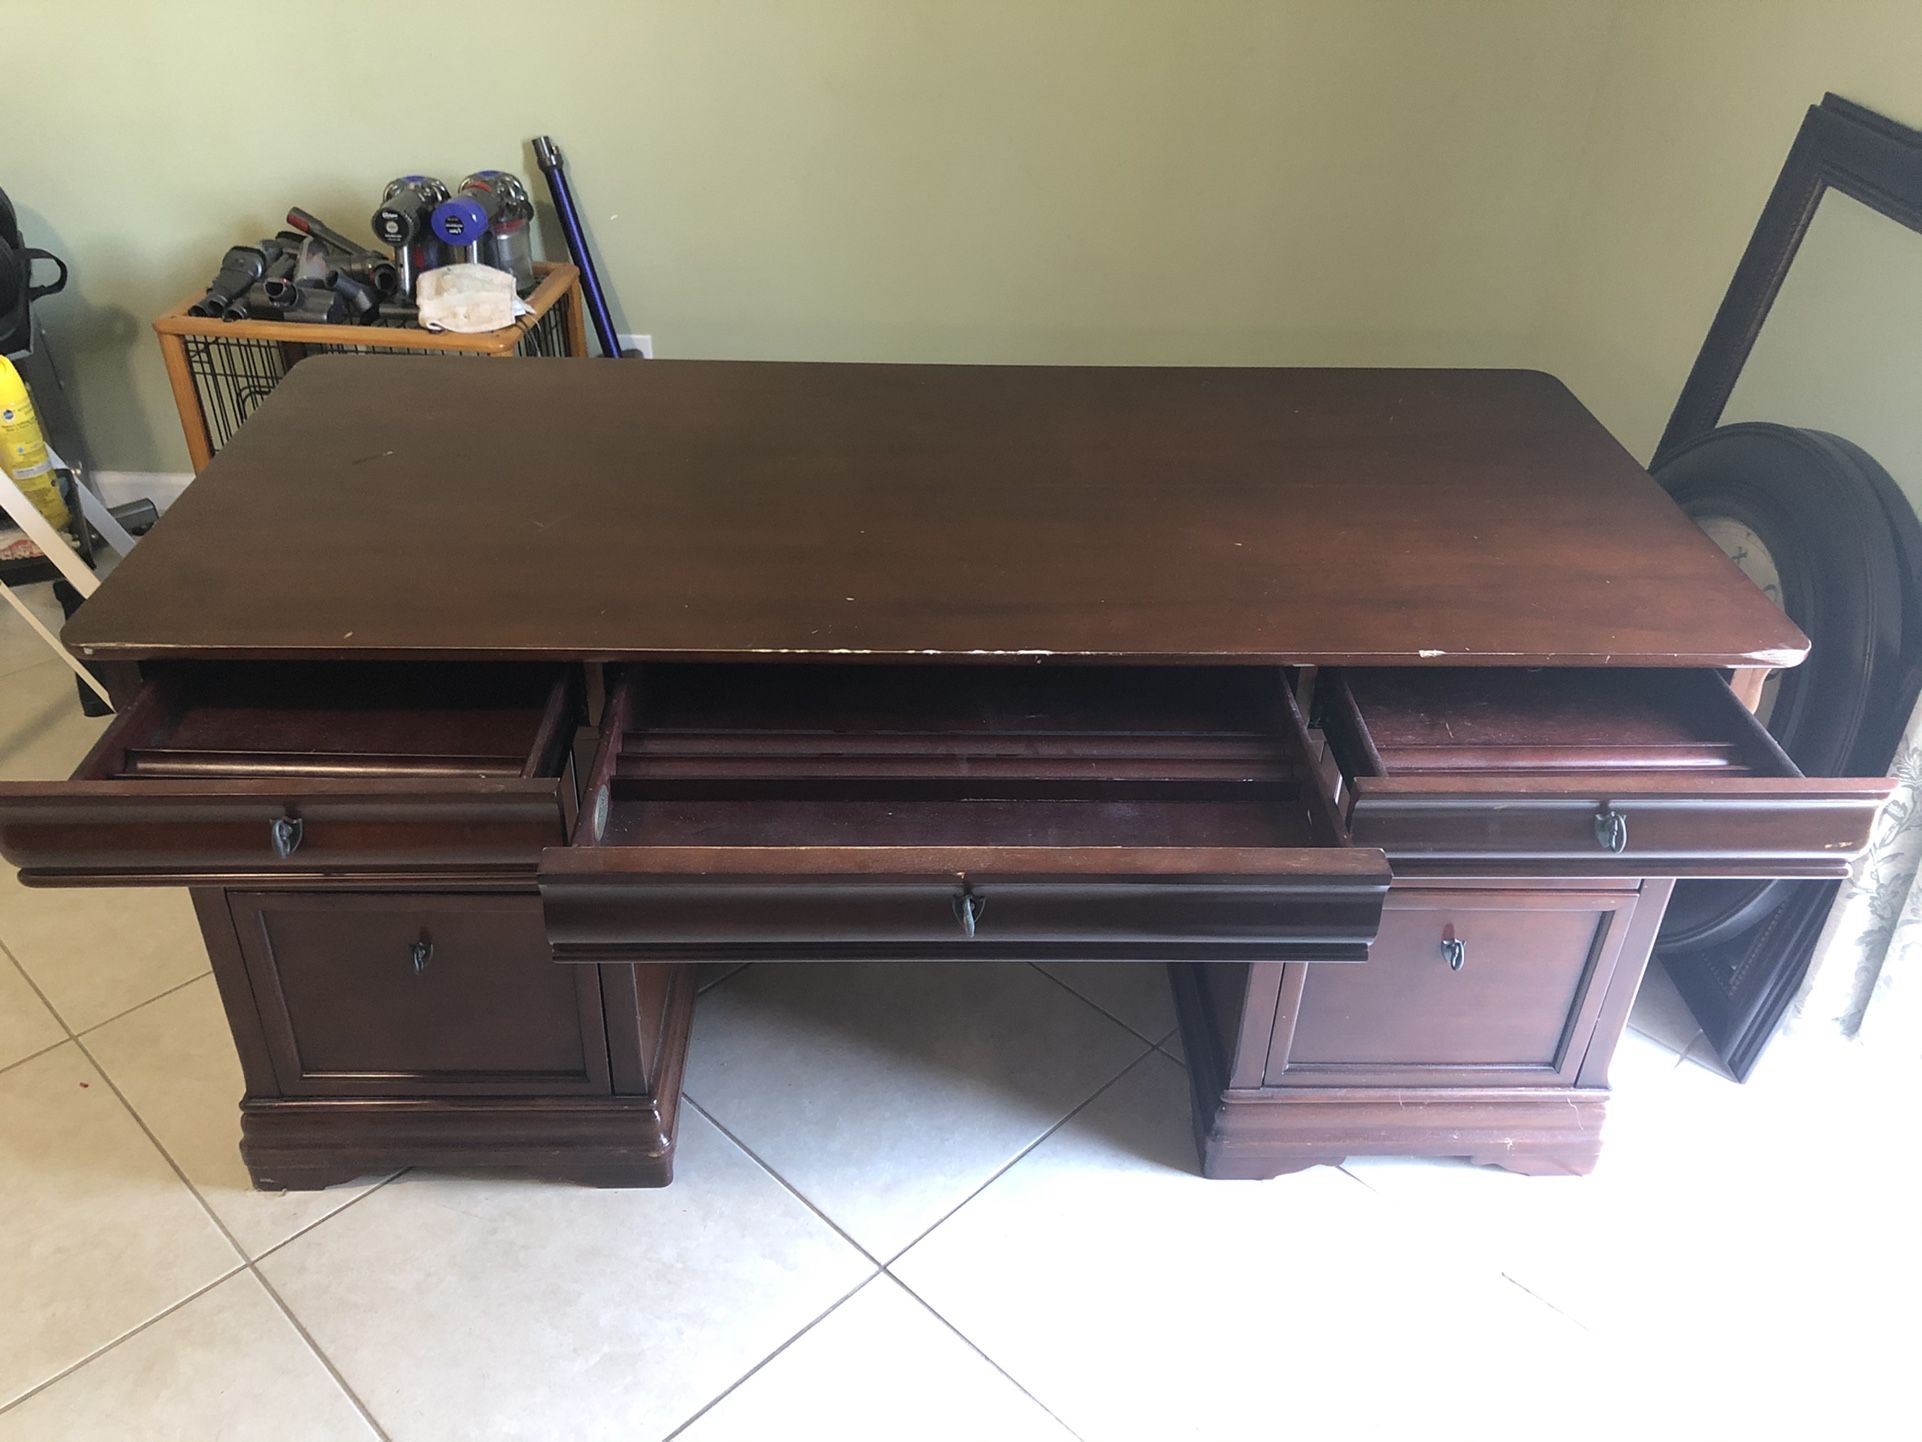 Solid Wood Desk - MOVING: Needs To Be Gone ASAP